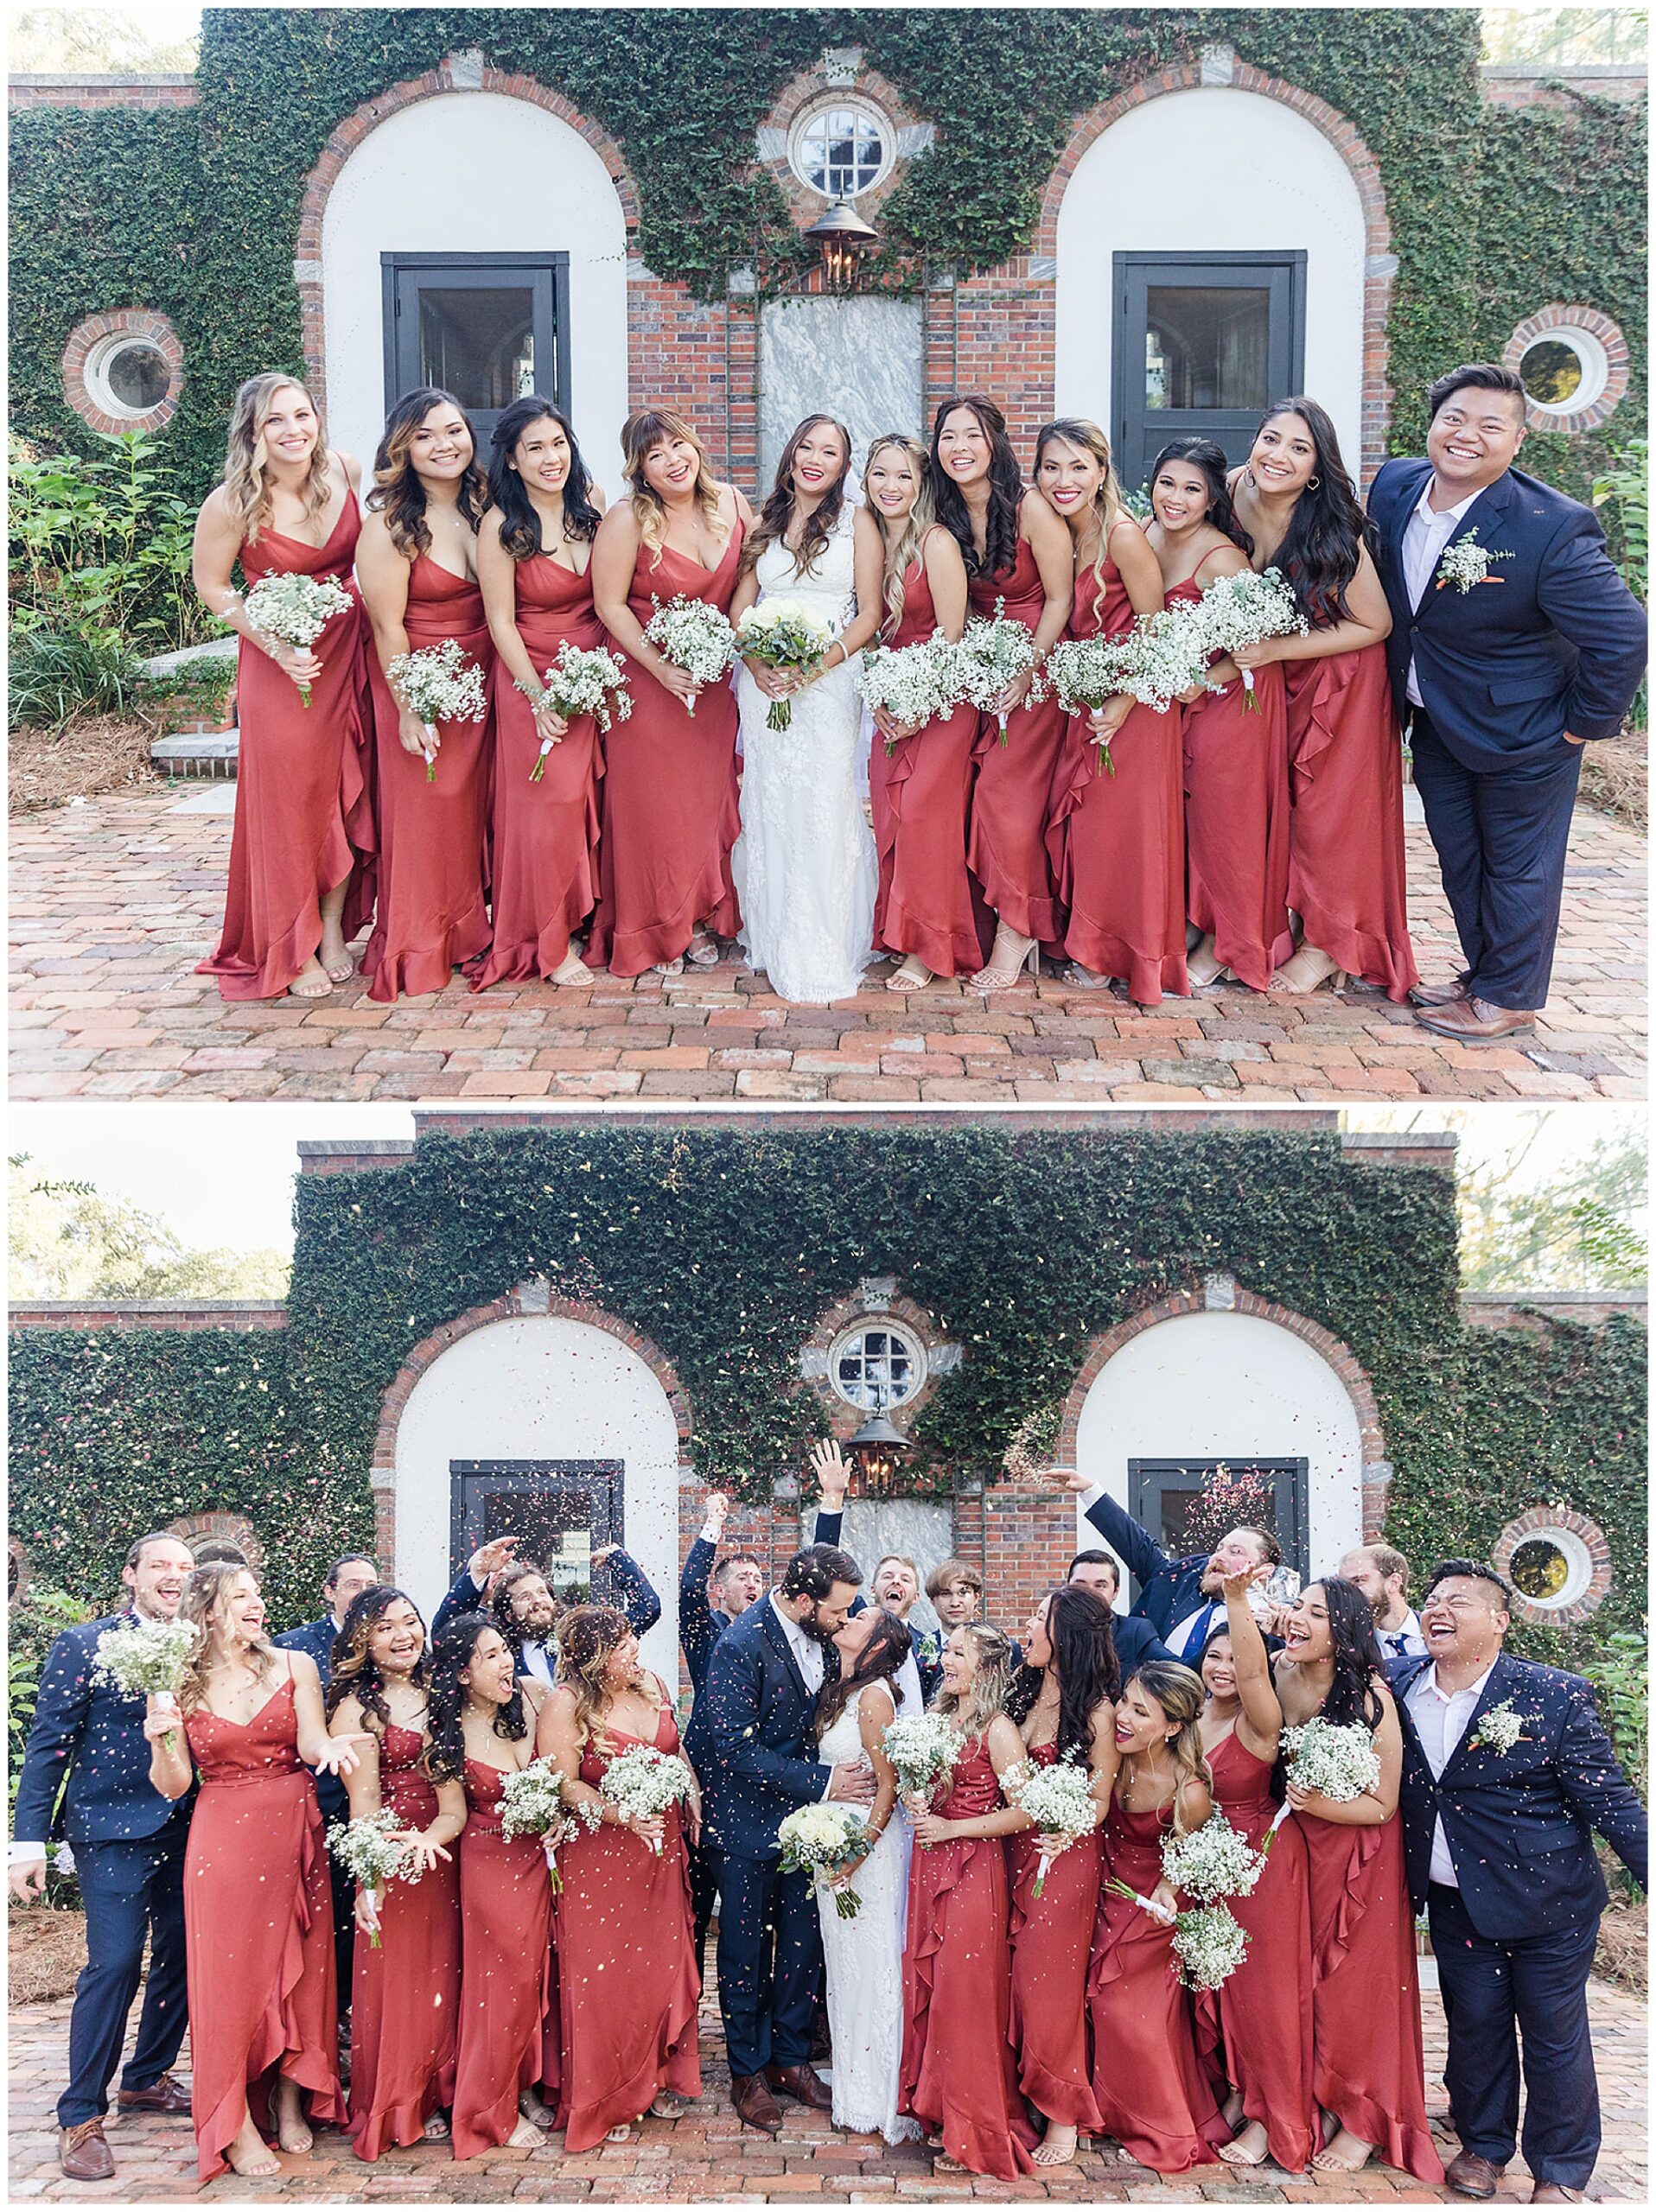 Bridal parties celebrate surrounding the kissing newlyweds in front of an ivy-covered wall at south eden plantation